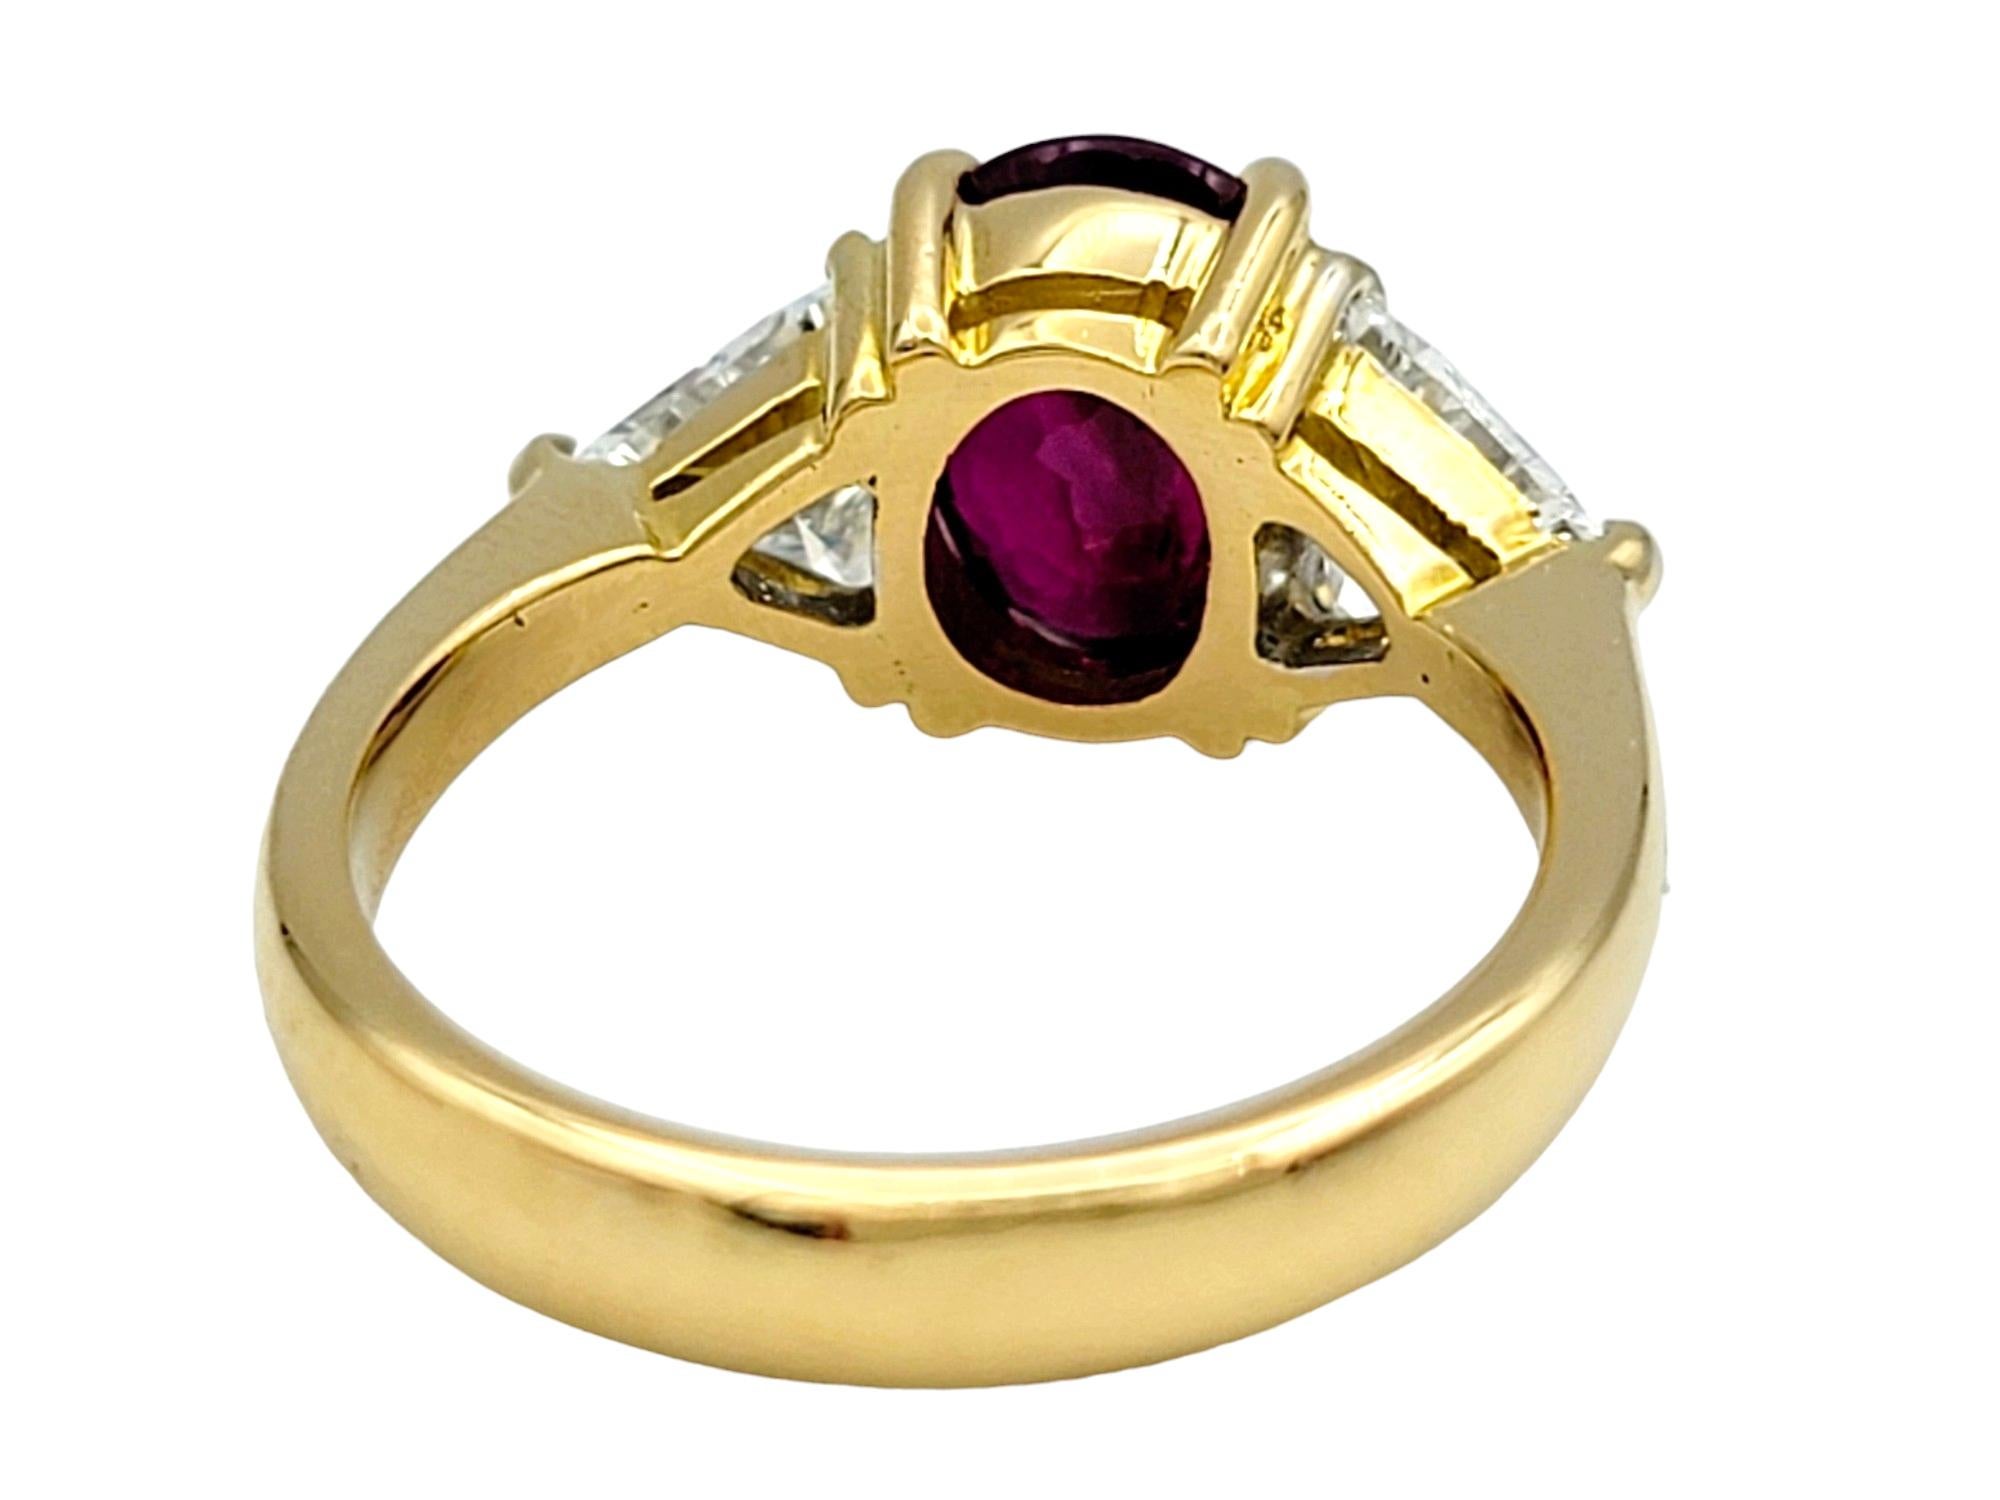 Women's Rare Natural Oval Cut Burma Ruby and Trillion Diamond Ring 18 Karat Yellow Gold For Sale